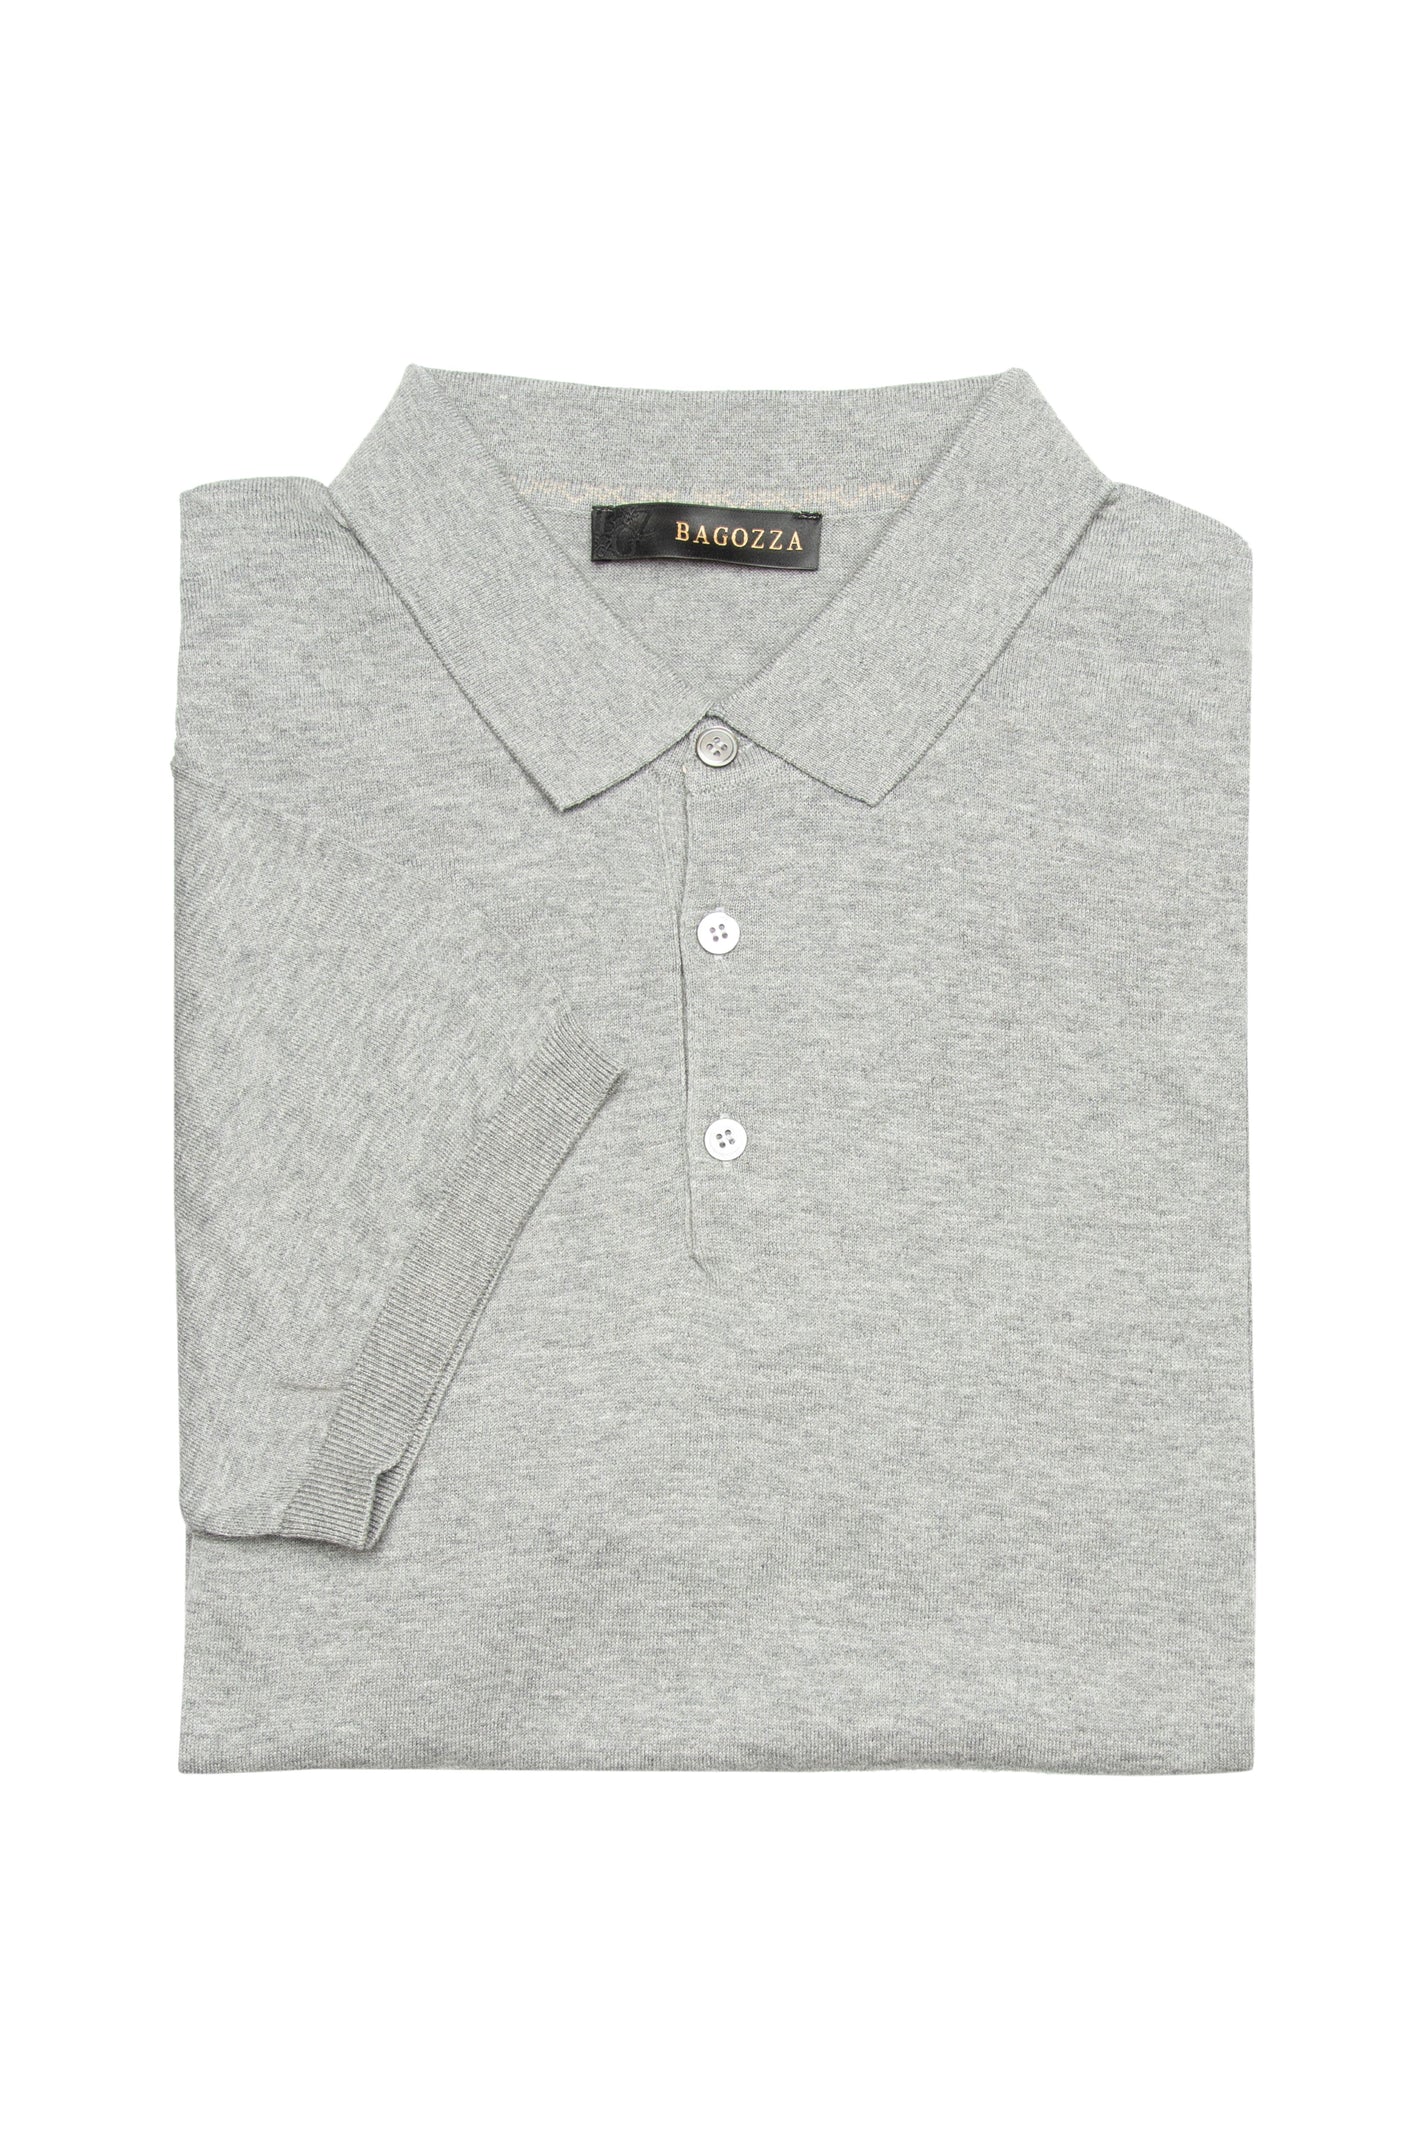 Men's Bagozza 100% cotton short sleeve golf shirt with ribbing in grey (6296) - available in-store, 337 Monty Naicker Street, Durban CBD or online at Omar's Tailors & Outfitters online store.   A men's fashion curation for South African men - established in 1911.